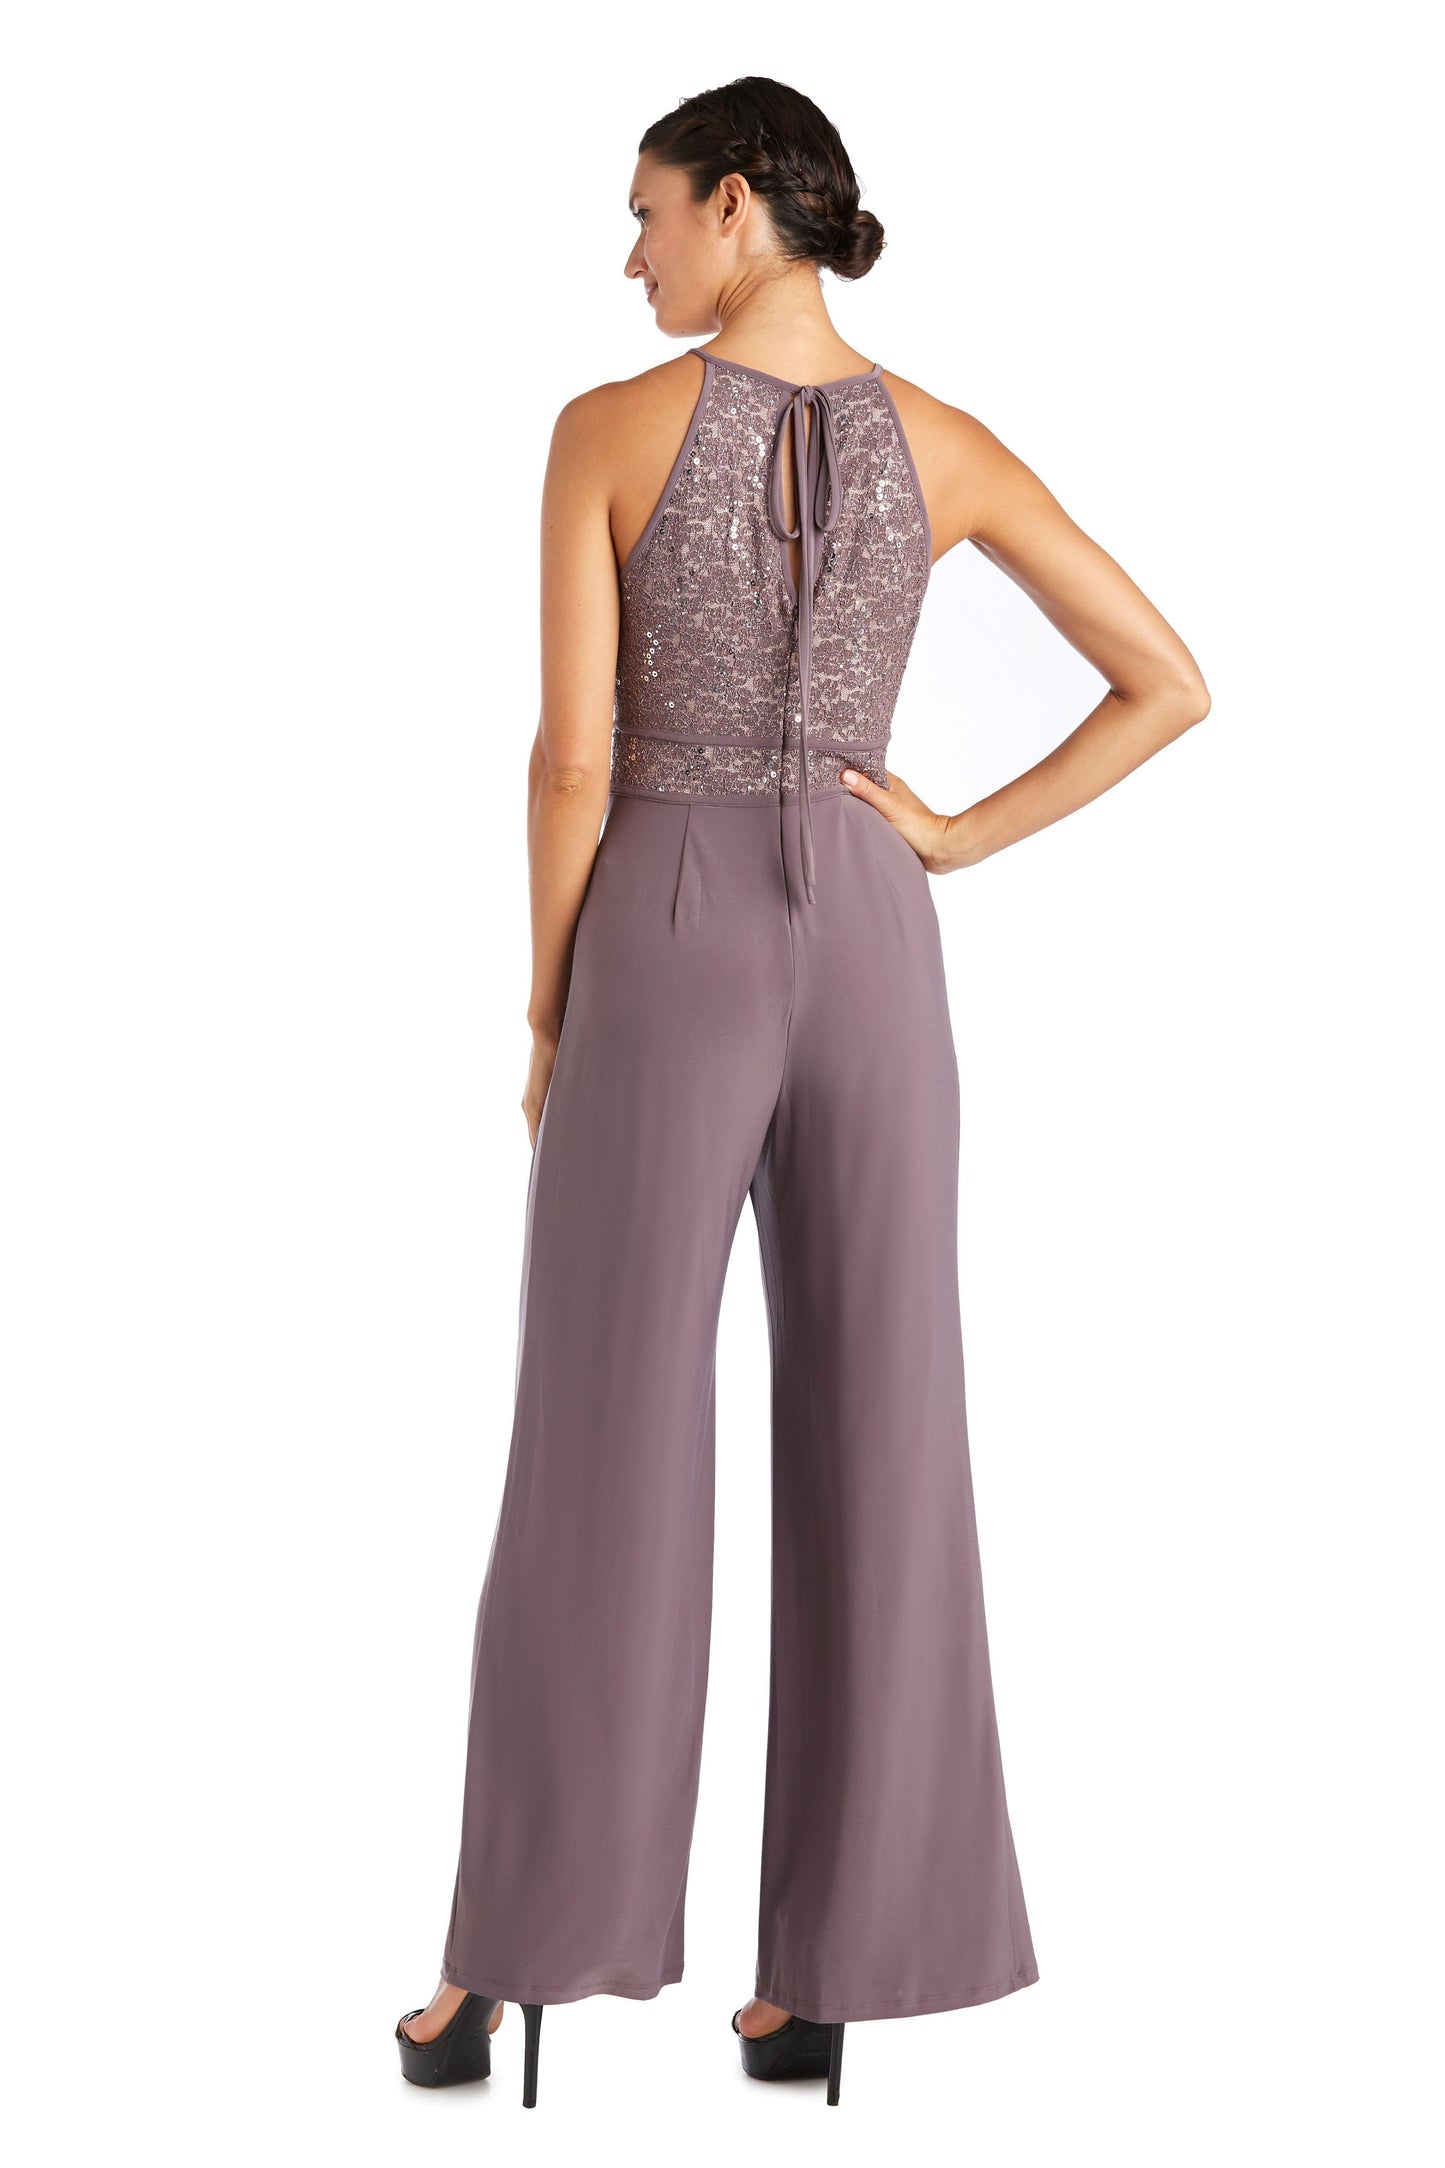 Nightway Lace Pant Jumpsuit Formal 21508 - The Dress Outlet